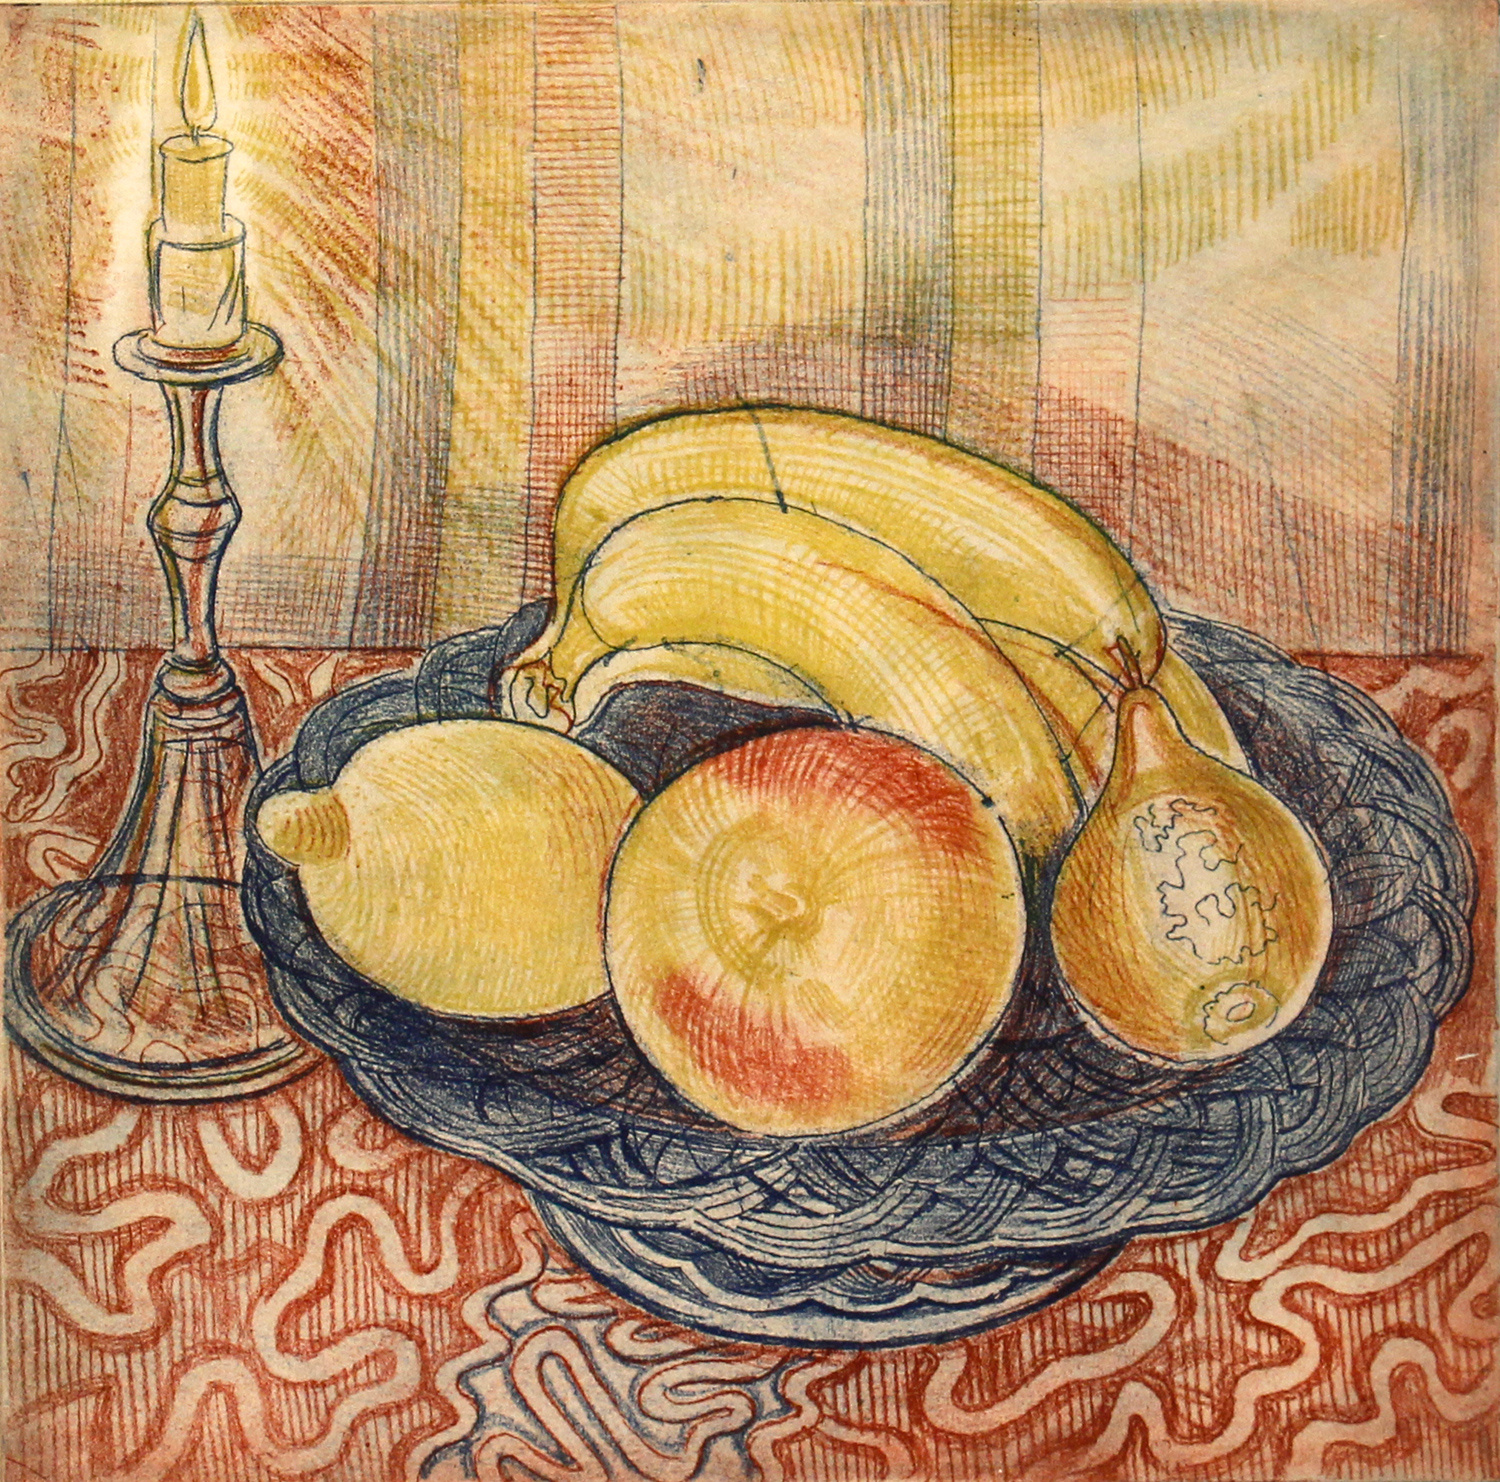 Millenium Candle by Richard Bawden